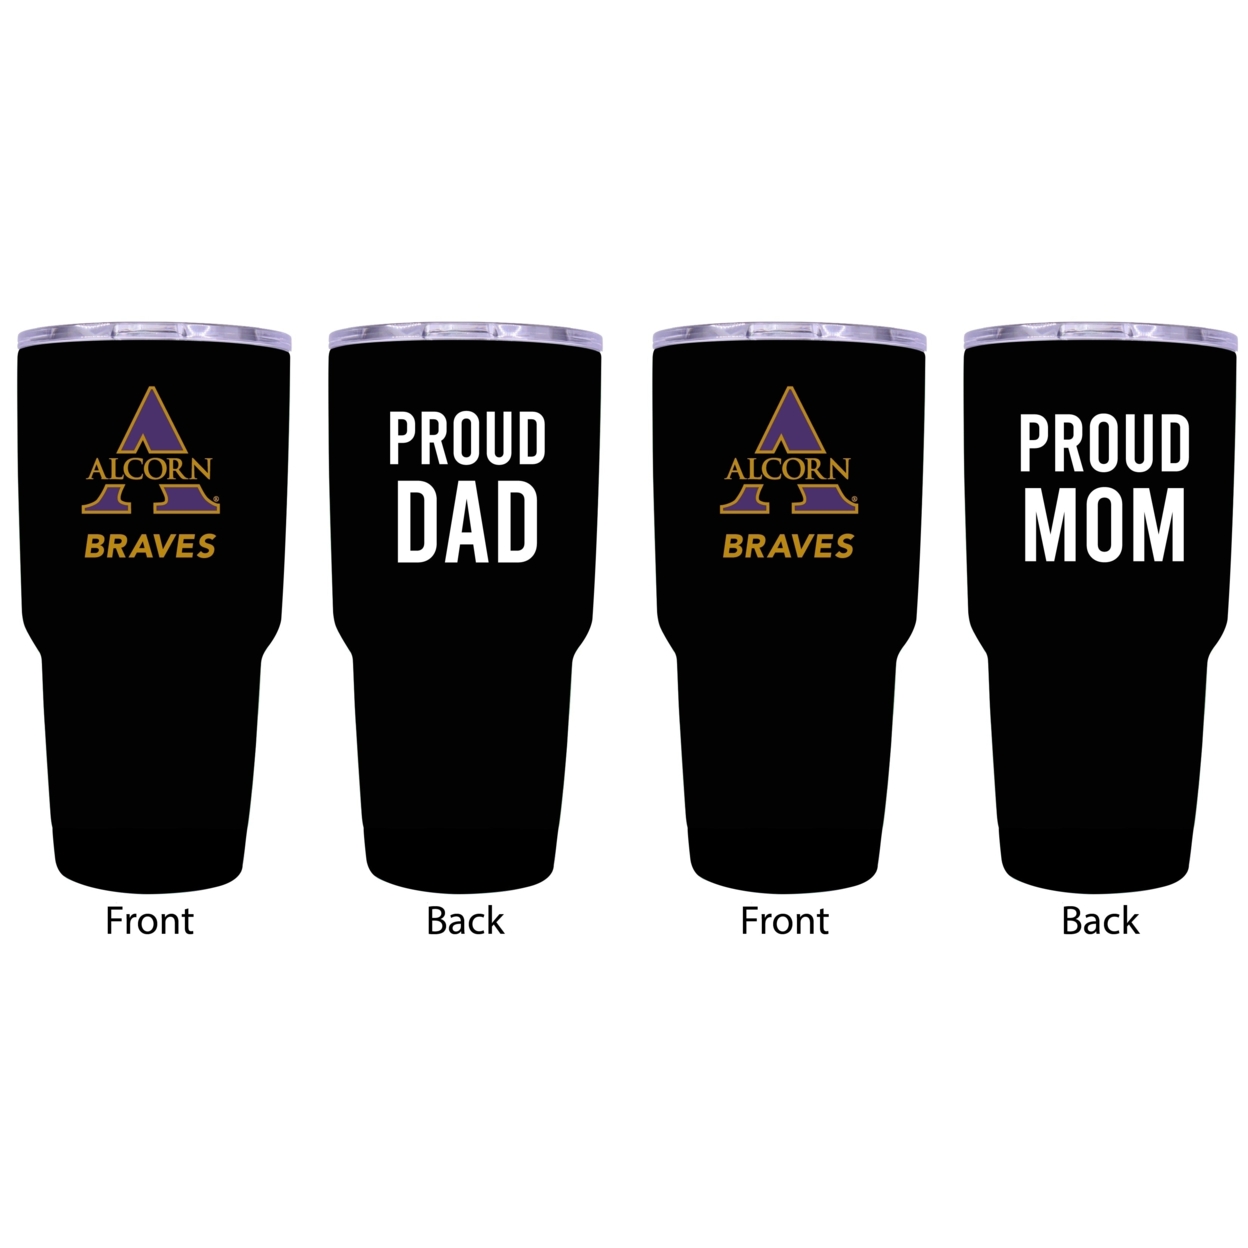 Alcorn State Braves Proud Mom And Dad 24 Oz Insulated Stainless Steel Tumblers 2 Pack Black.